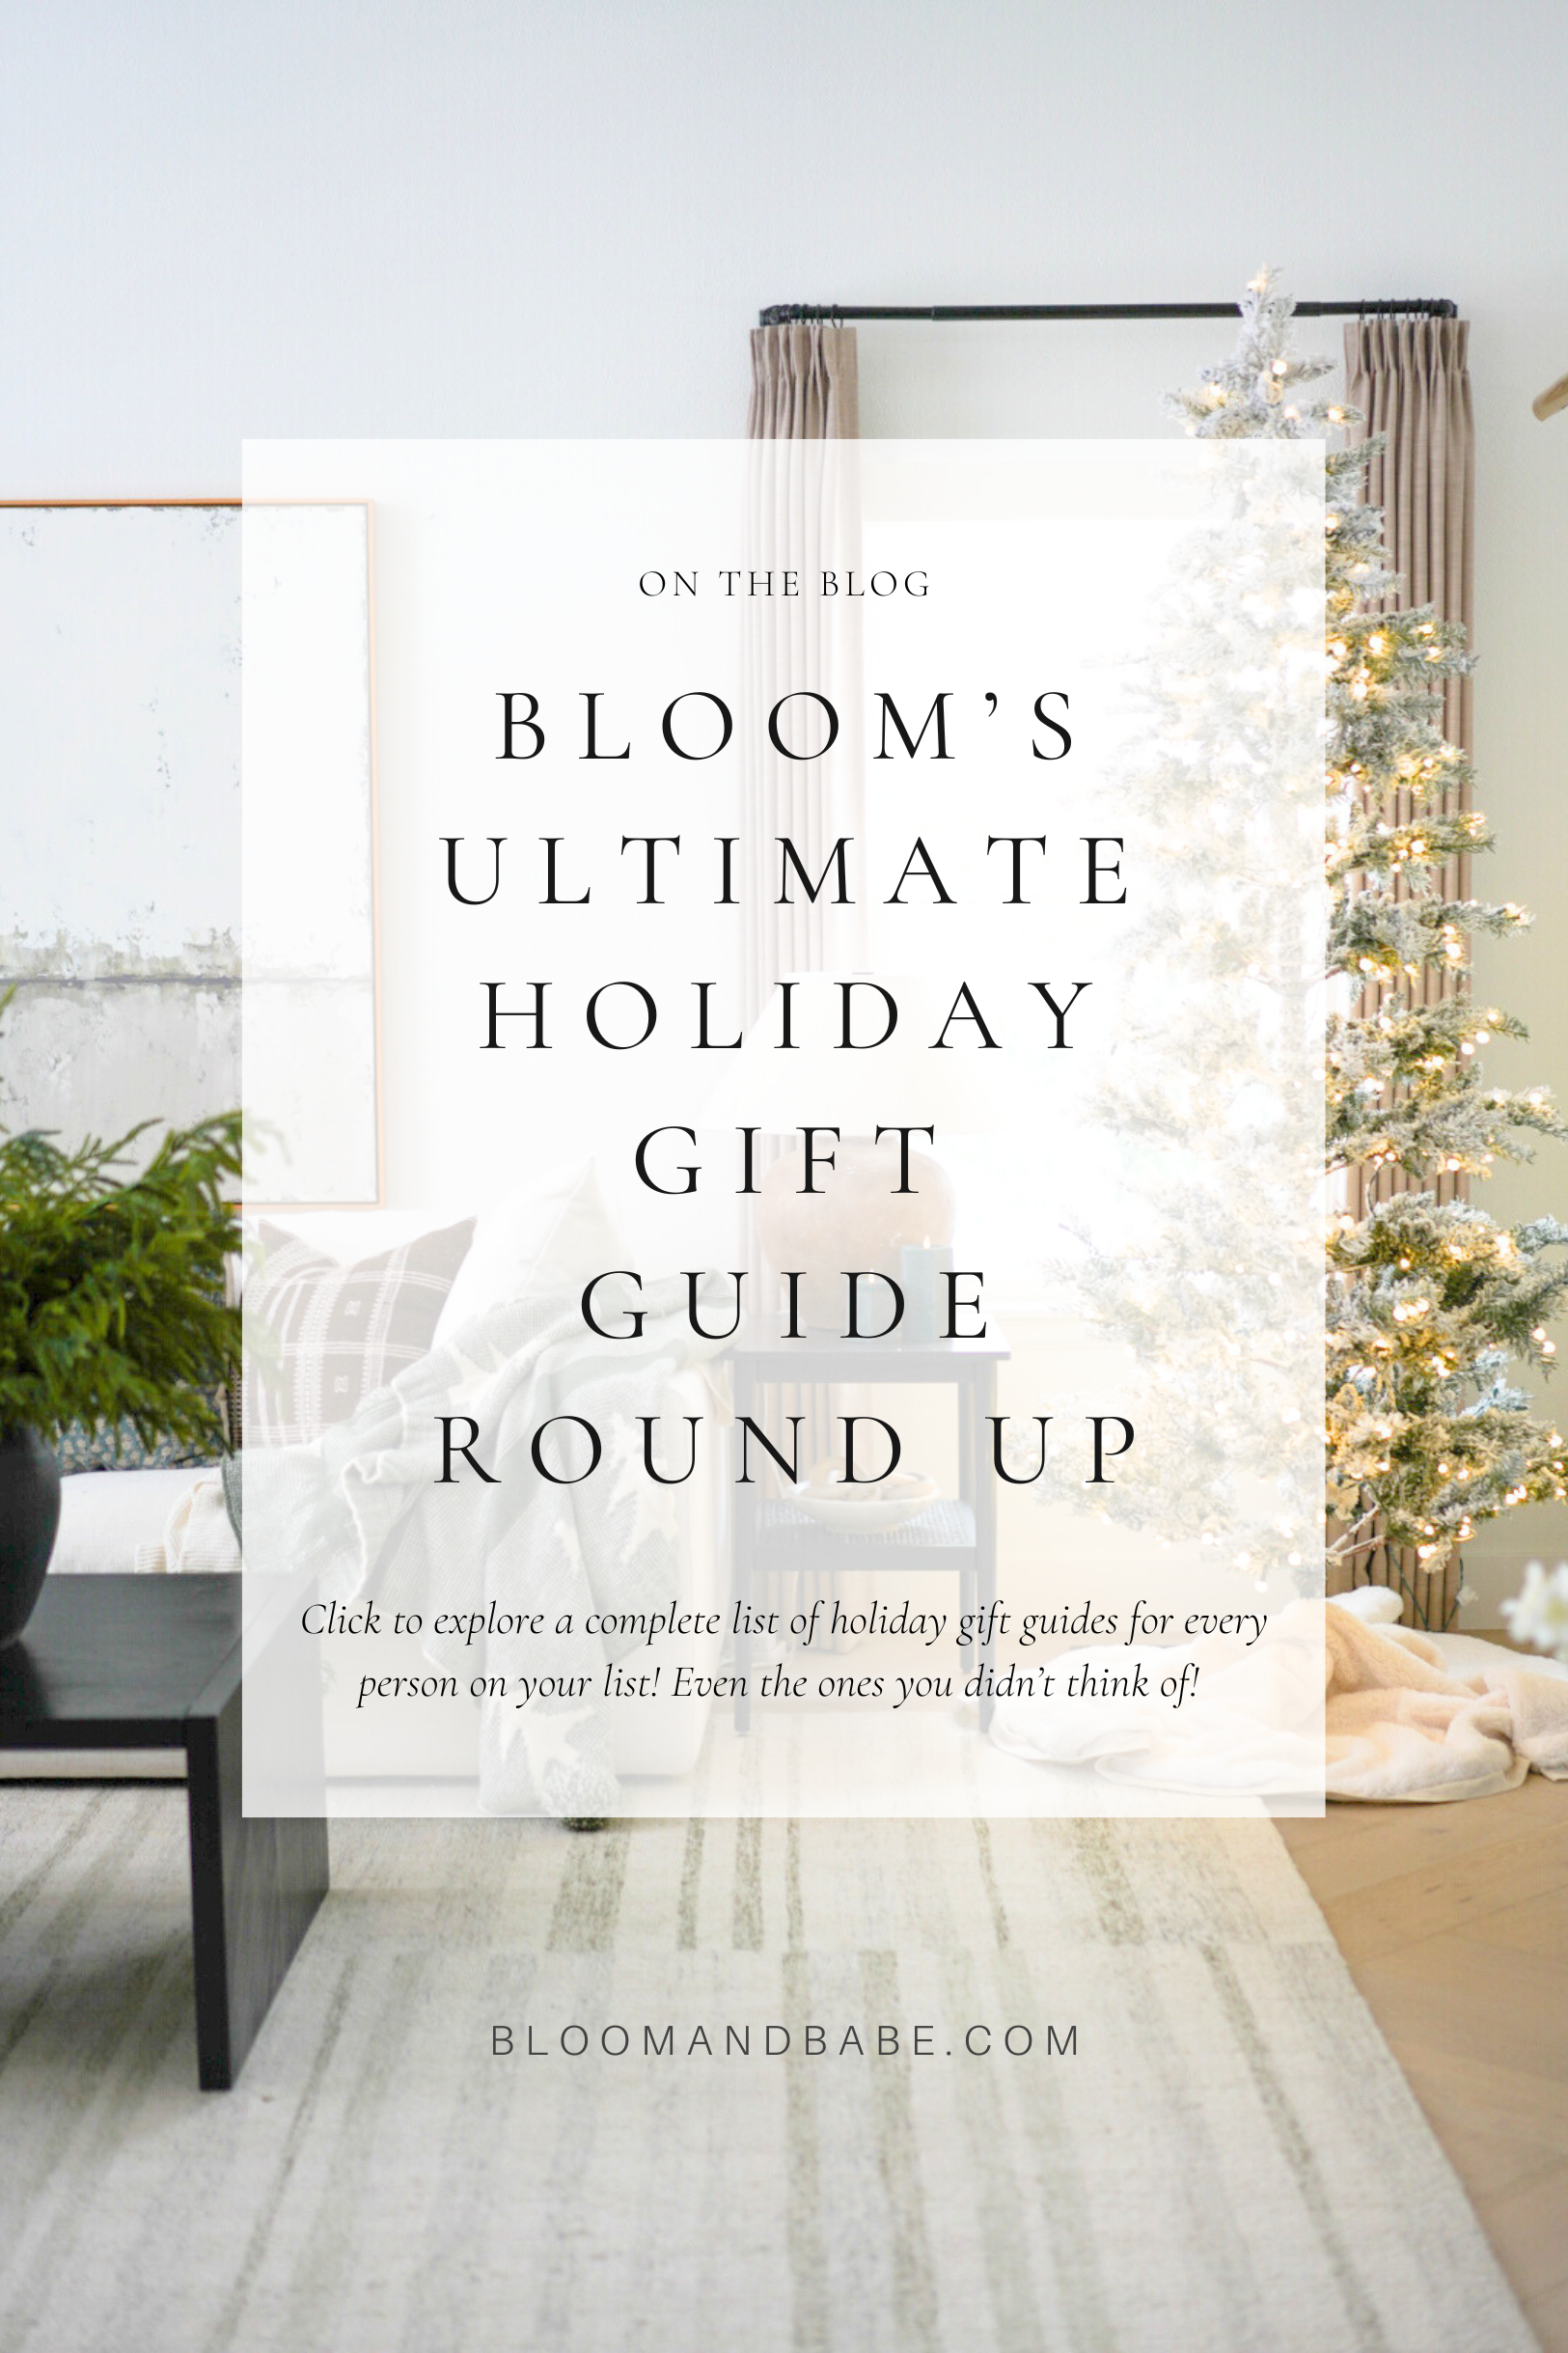 Bloom and Babe’s Ultimate Holiday Gift Guides